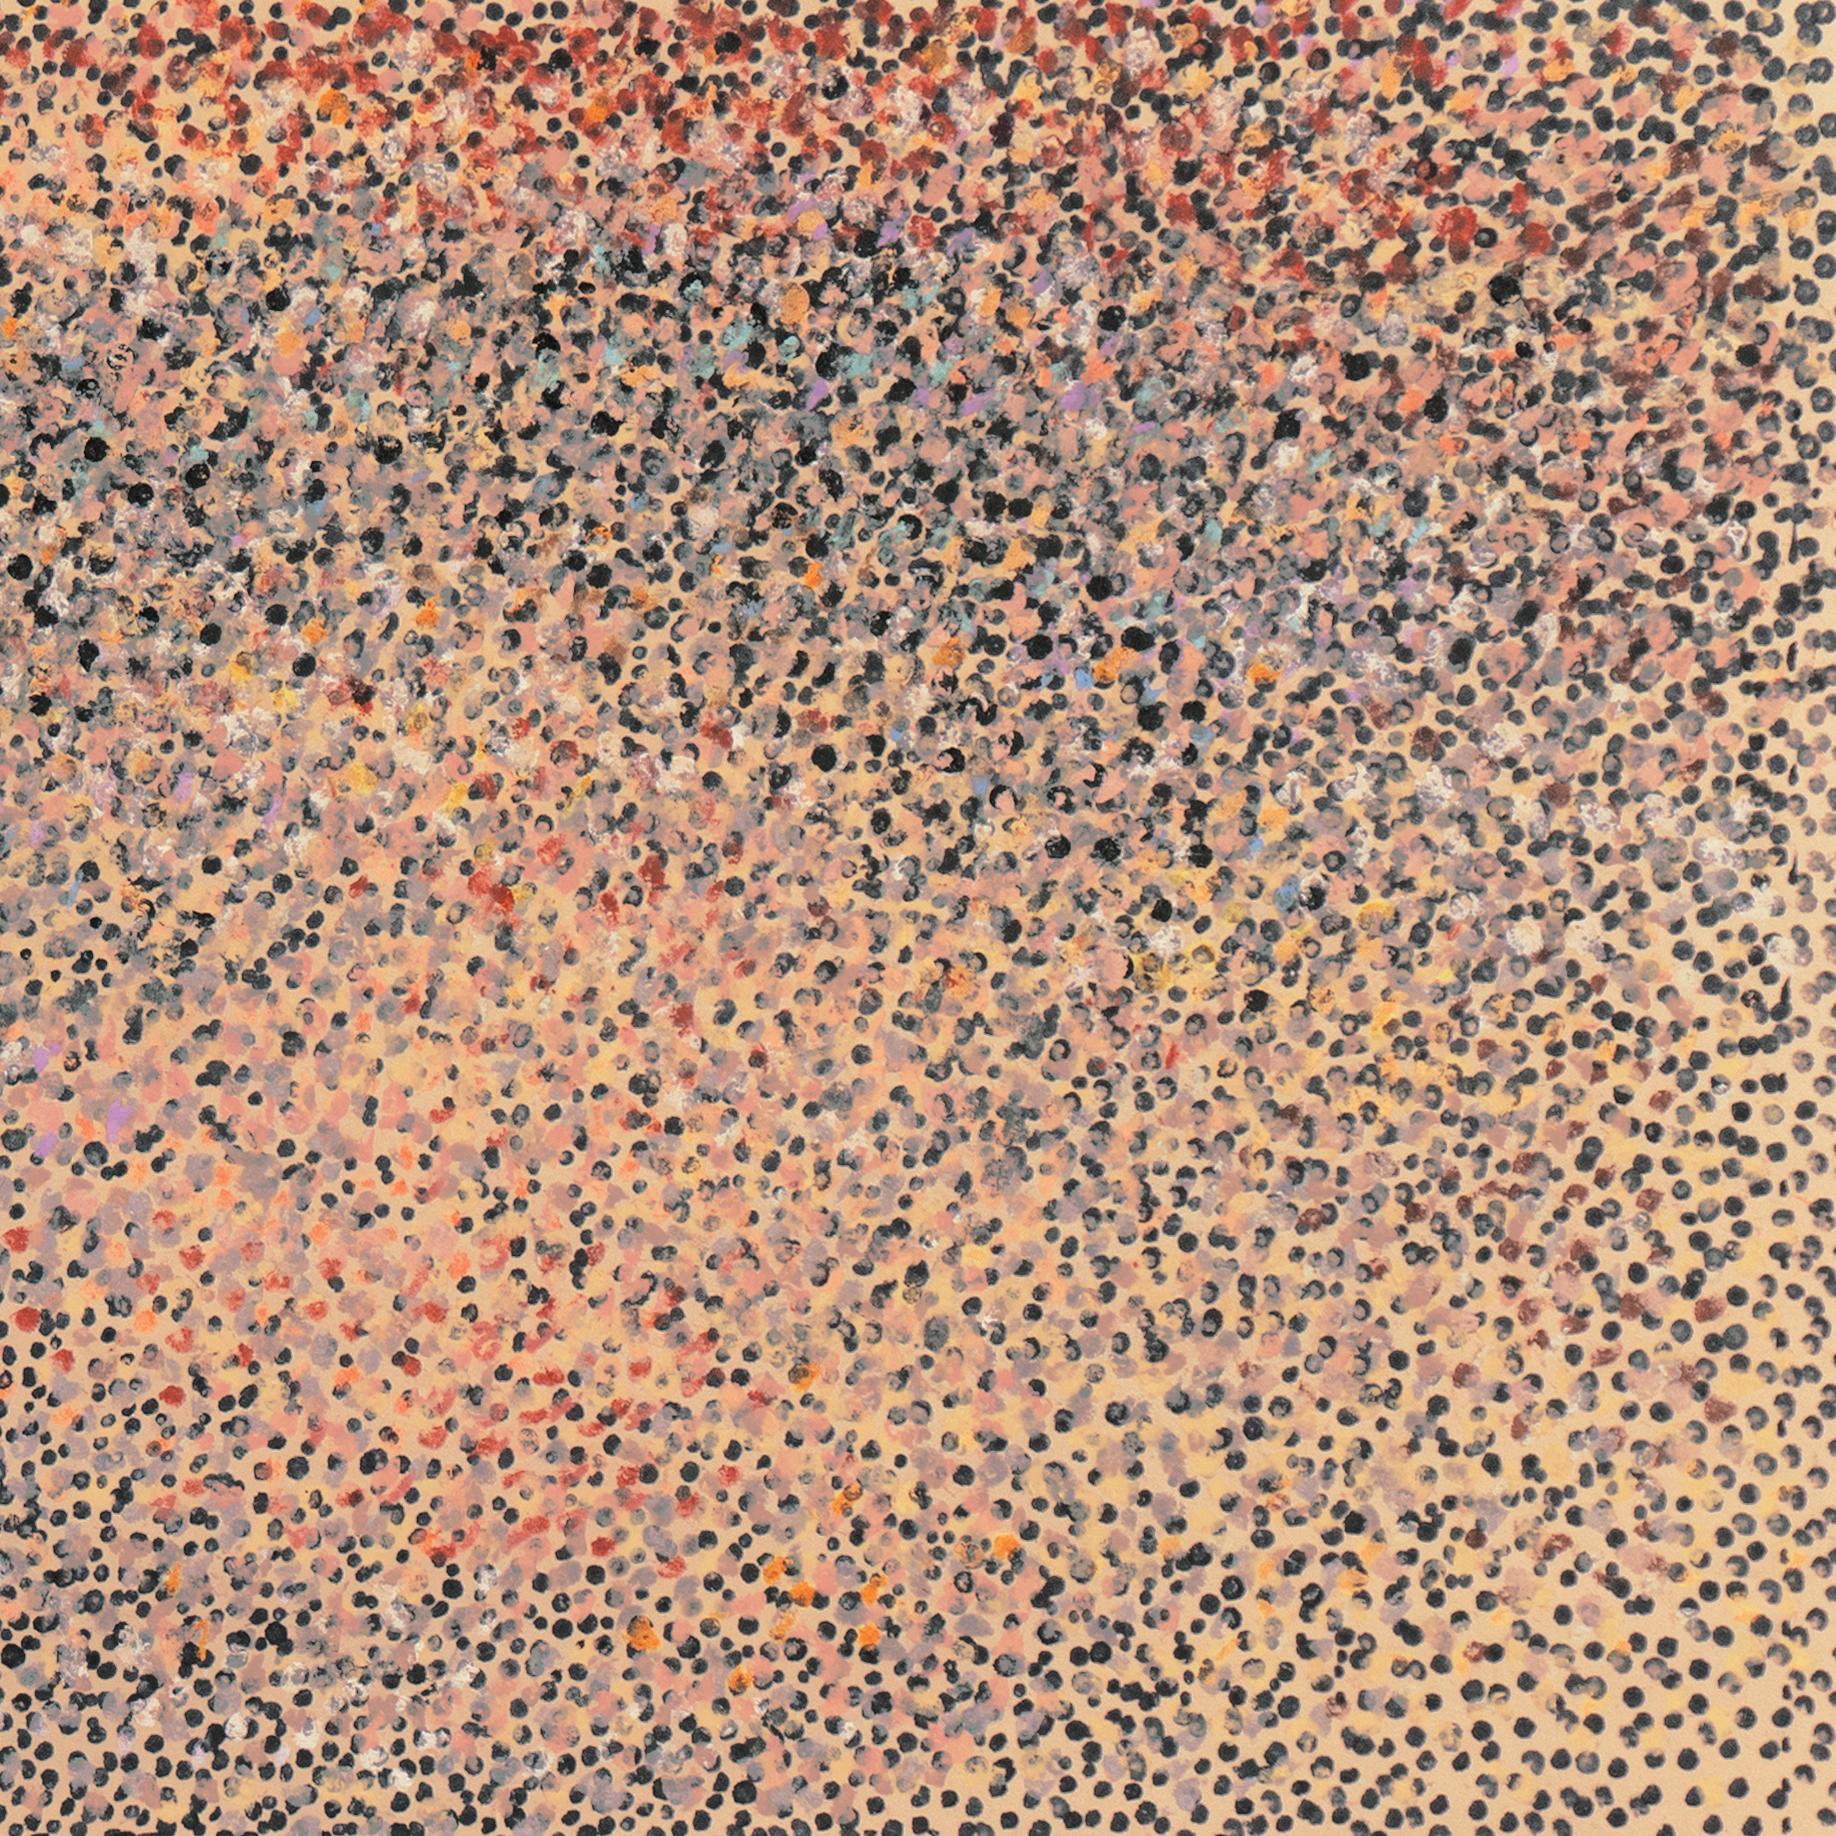 'Pointillist Abstract', Paris, Étretat, New York, Whitney Museum, MoMA, PAFA - Brown Abstract Drawing by Manfred Schwartz